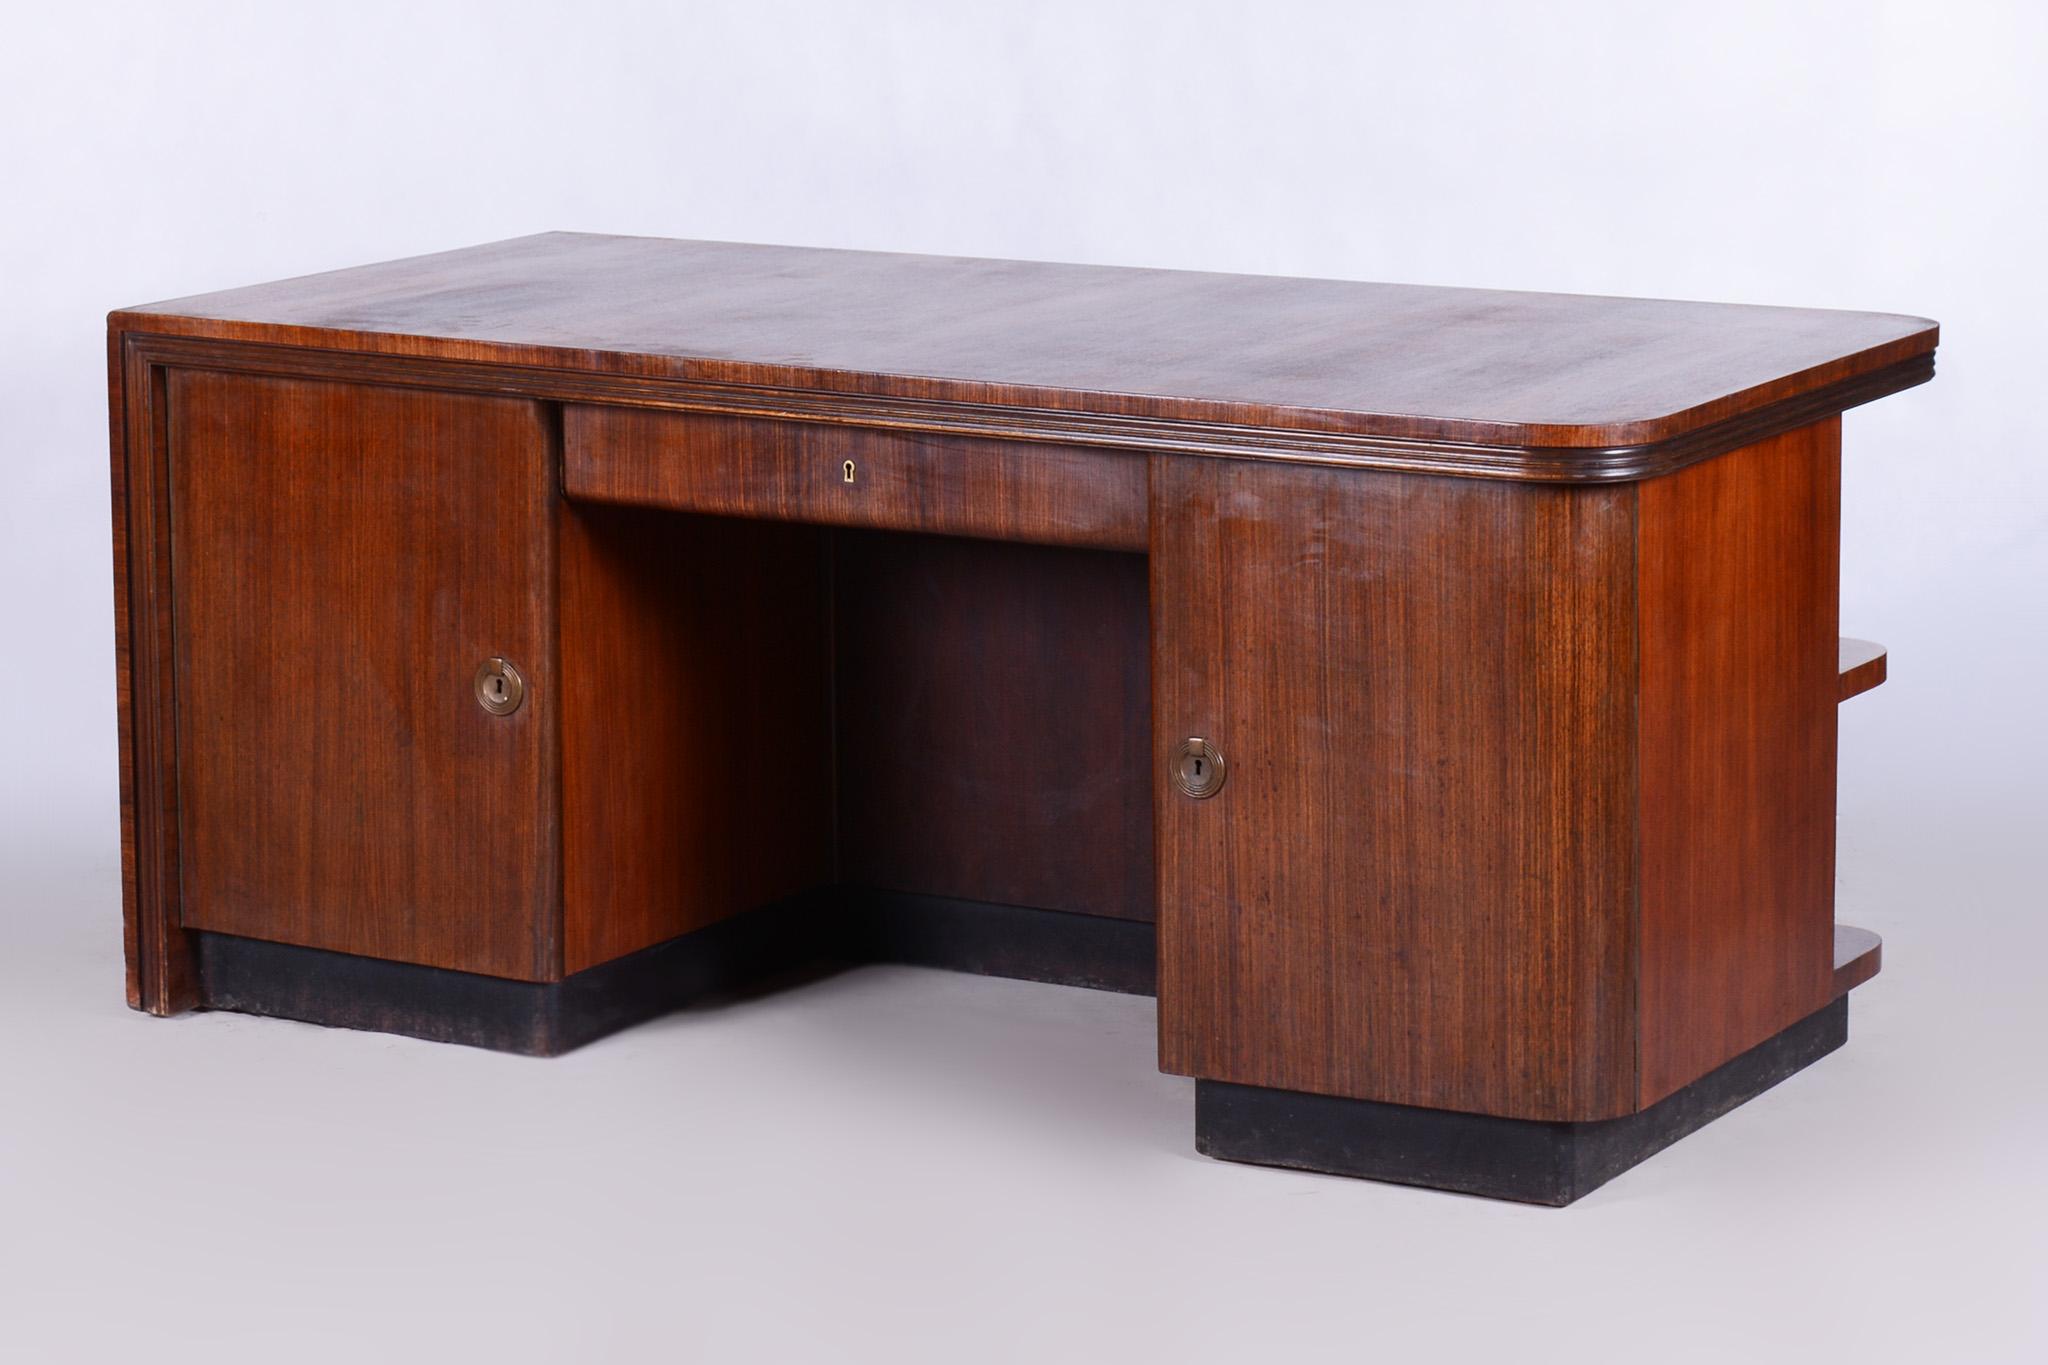 Restored Art Deco Writing Desk, Germany, 1930s, Revived Polish In Good Condition For Sale In Horomerice, CZ